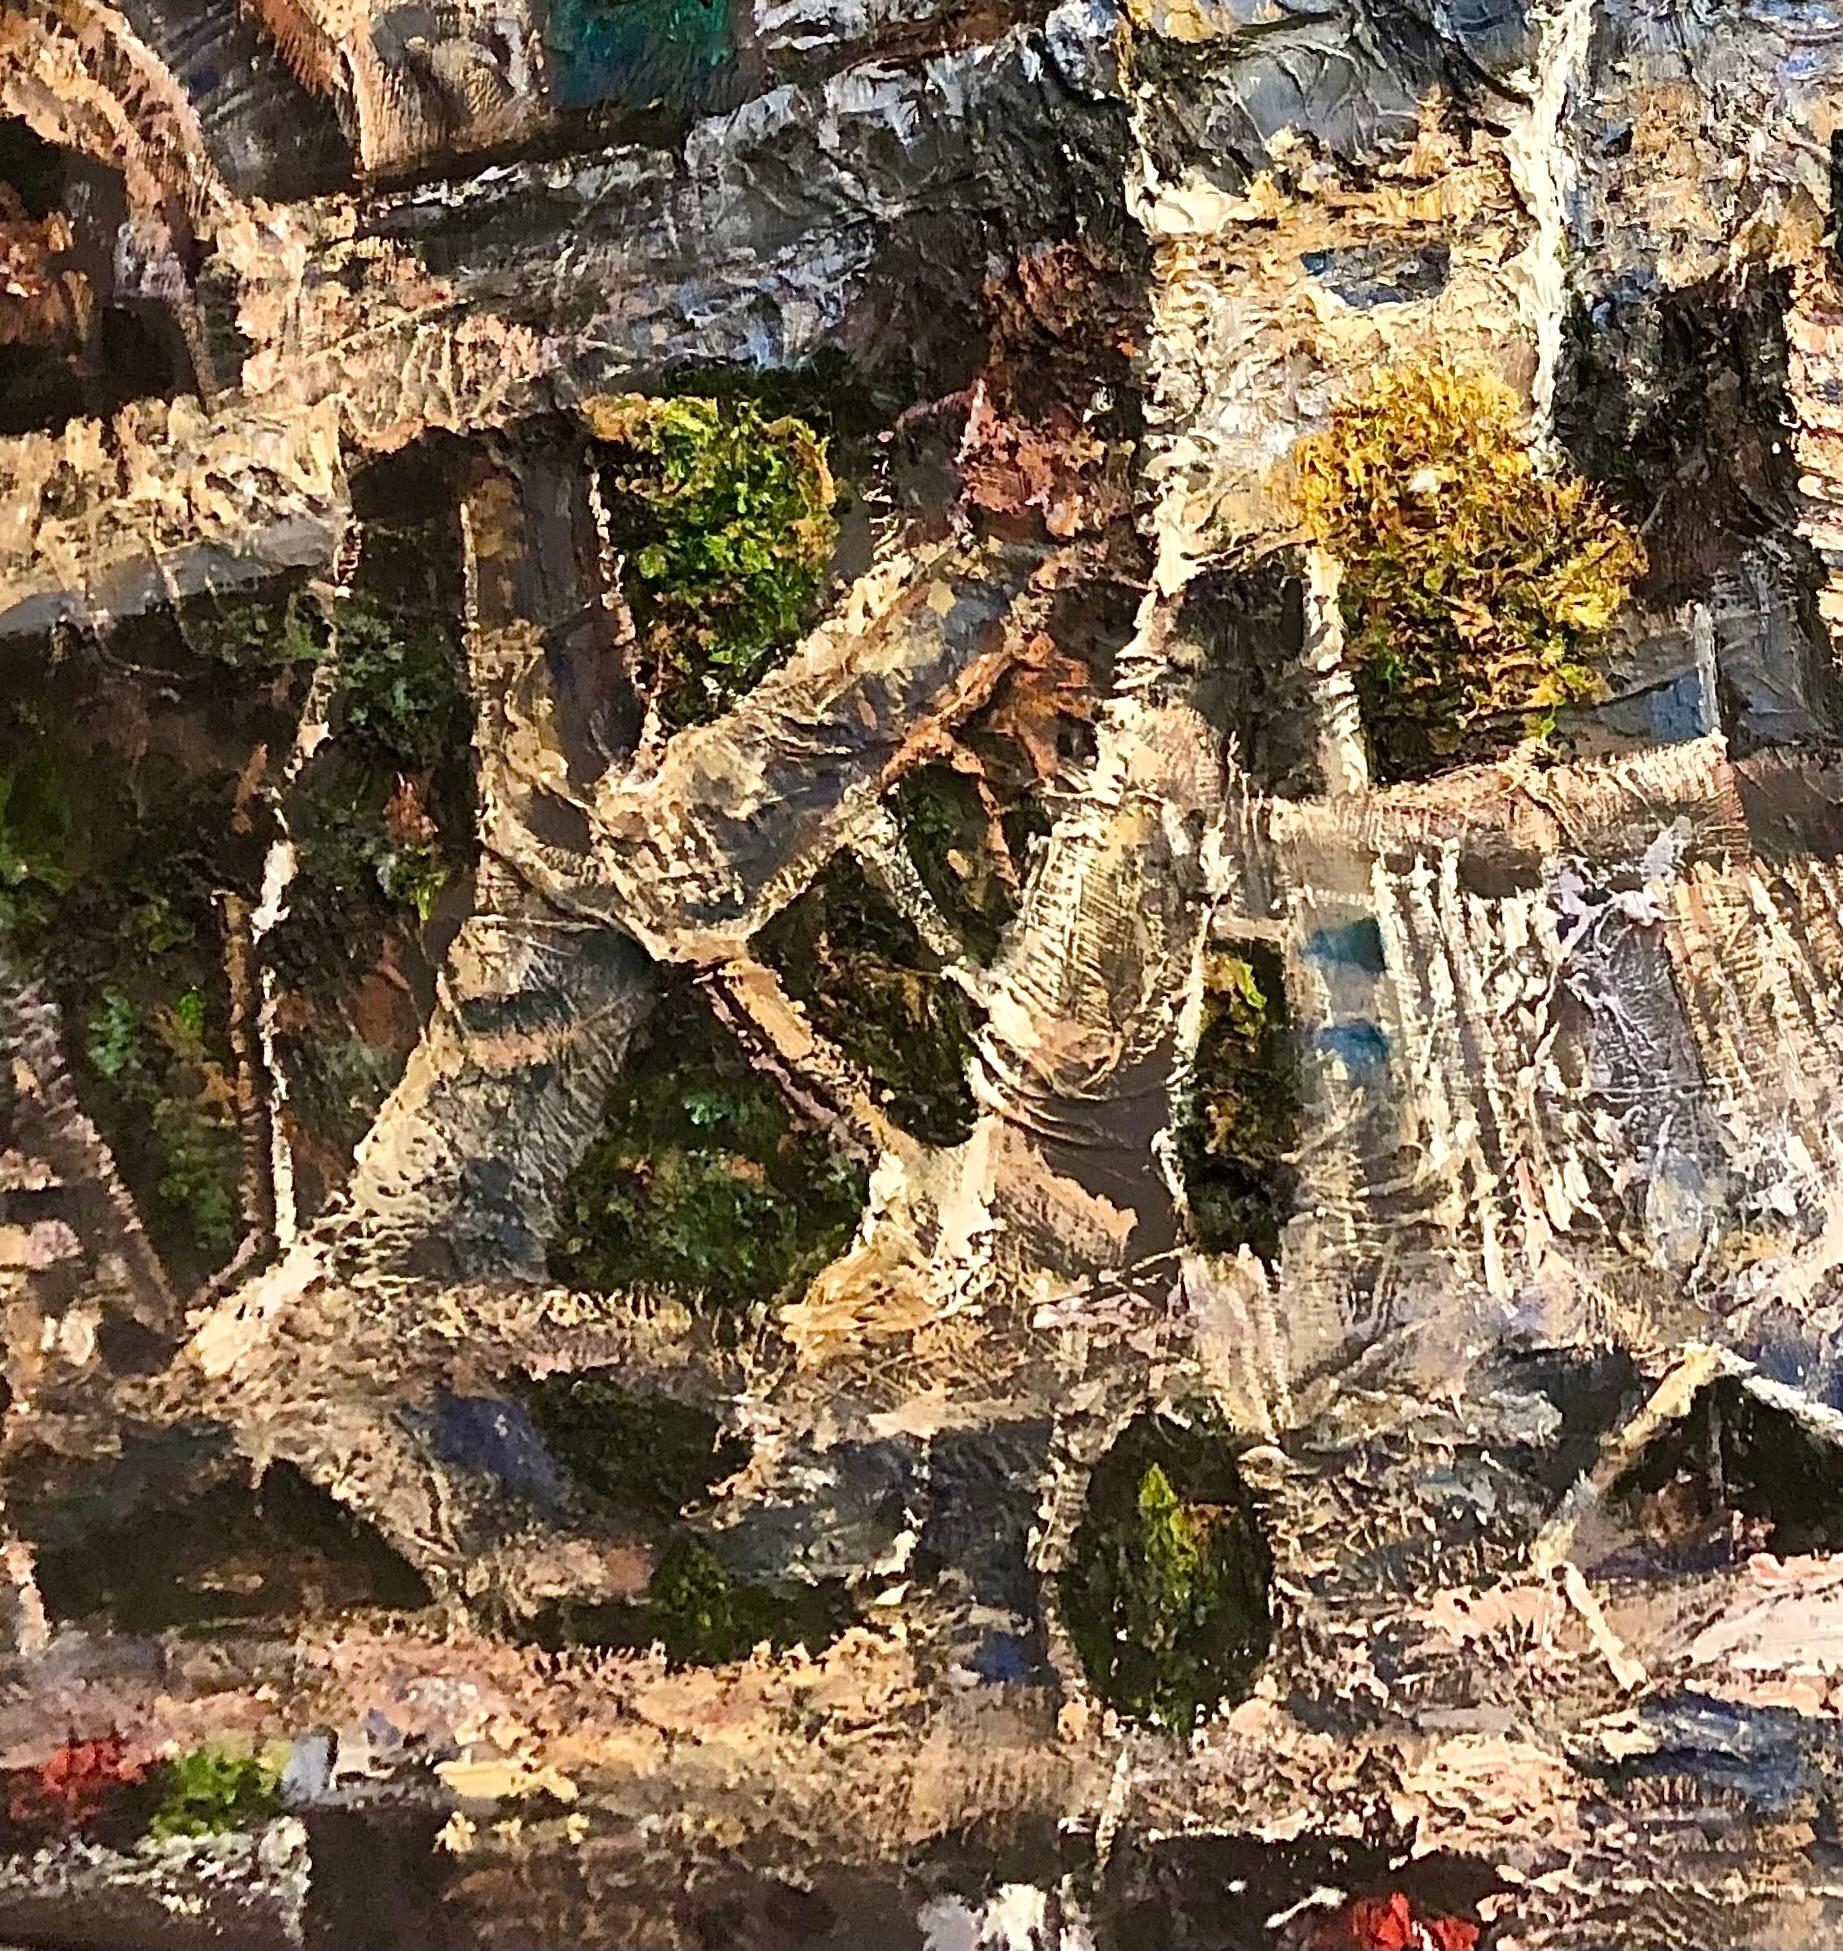 Stunning textural abstract aerial landscape painting by Hungarian artist Levente Baranyai. Oil on panel, 37.5 x 50 inches.

With a focus on aerial urban and rural landscapes, Levente Baranyai's compositions are invariably large, painted with thick,